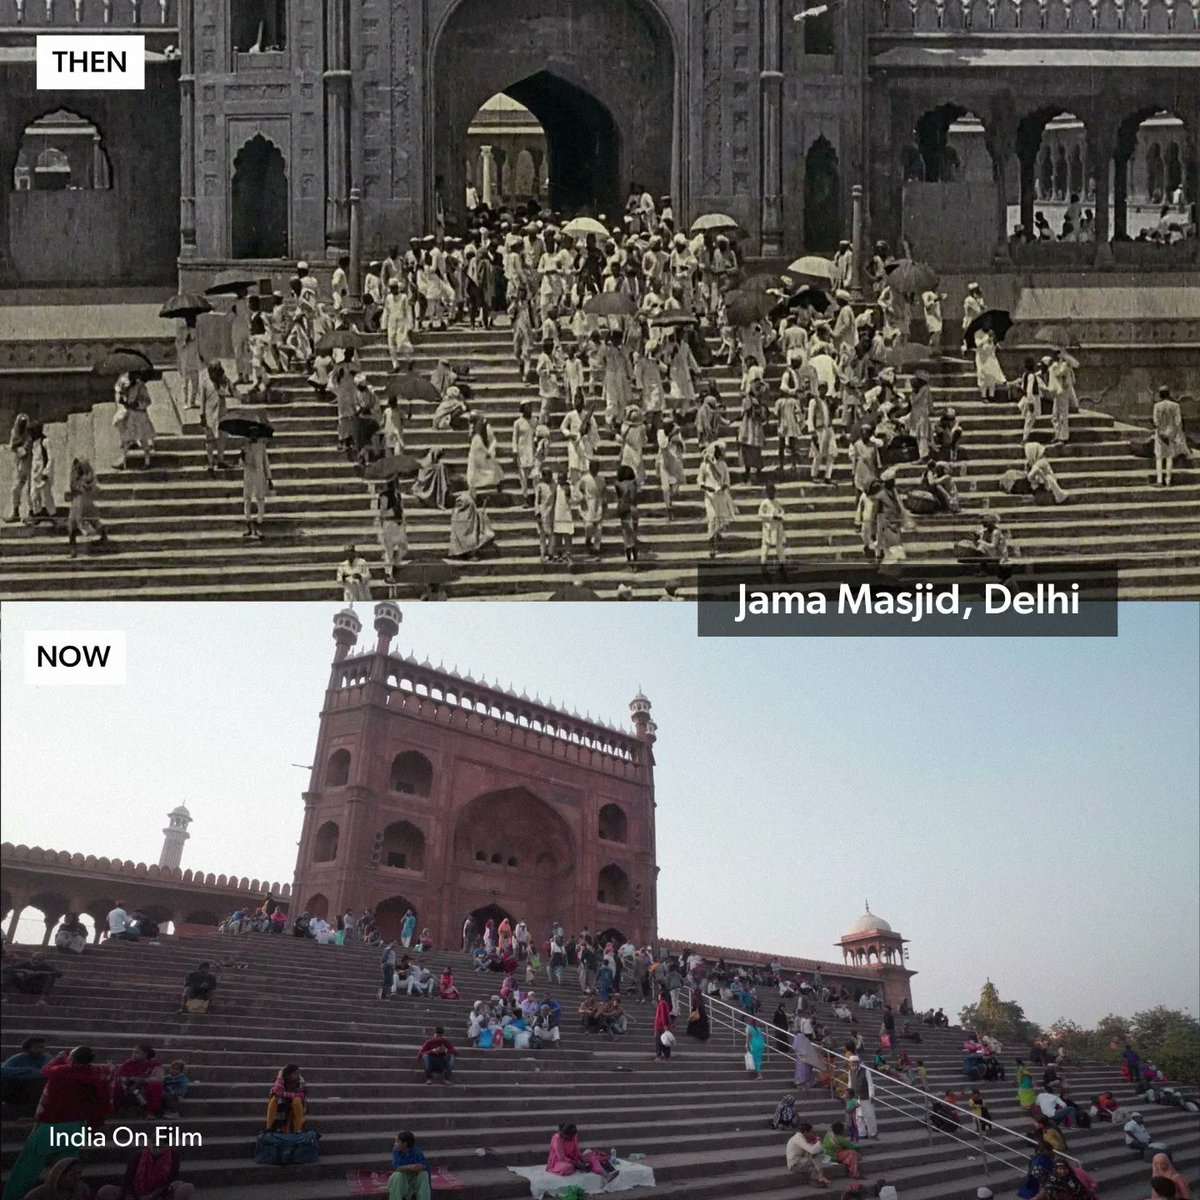 A testament of time 📷

Watch India On Film, on discovery+
#Indianhistorymonth
#discoveryplusin #discoveryplus #indiaonfilm #history #india #travelinindia #indiatourism